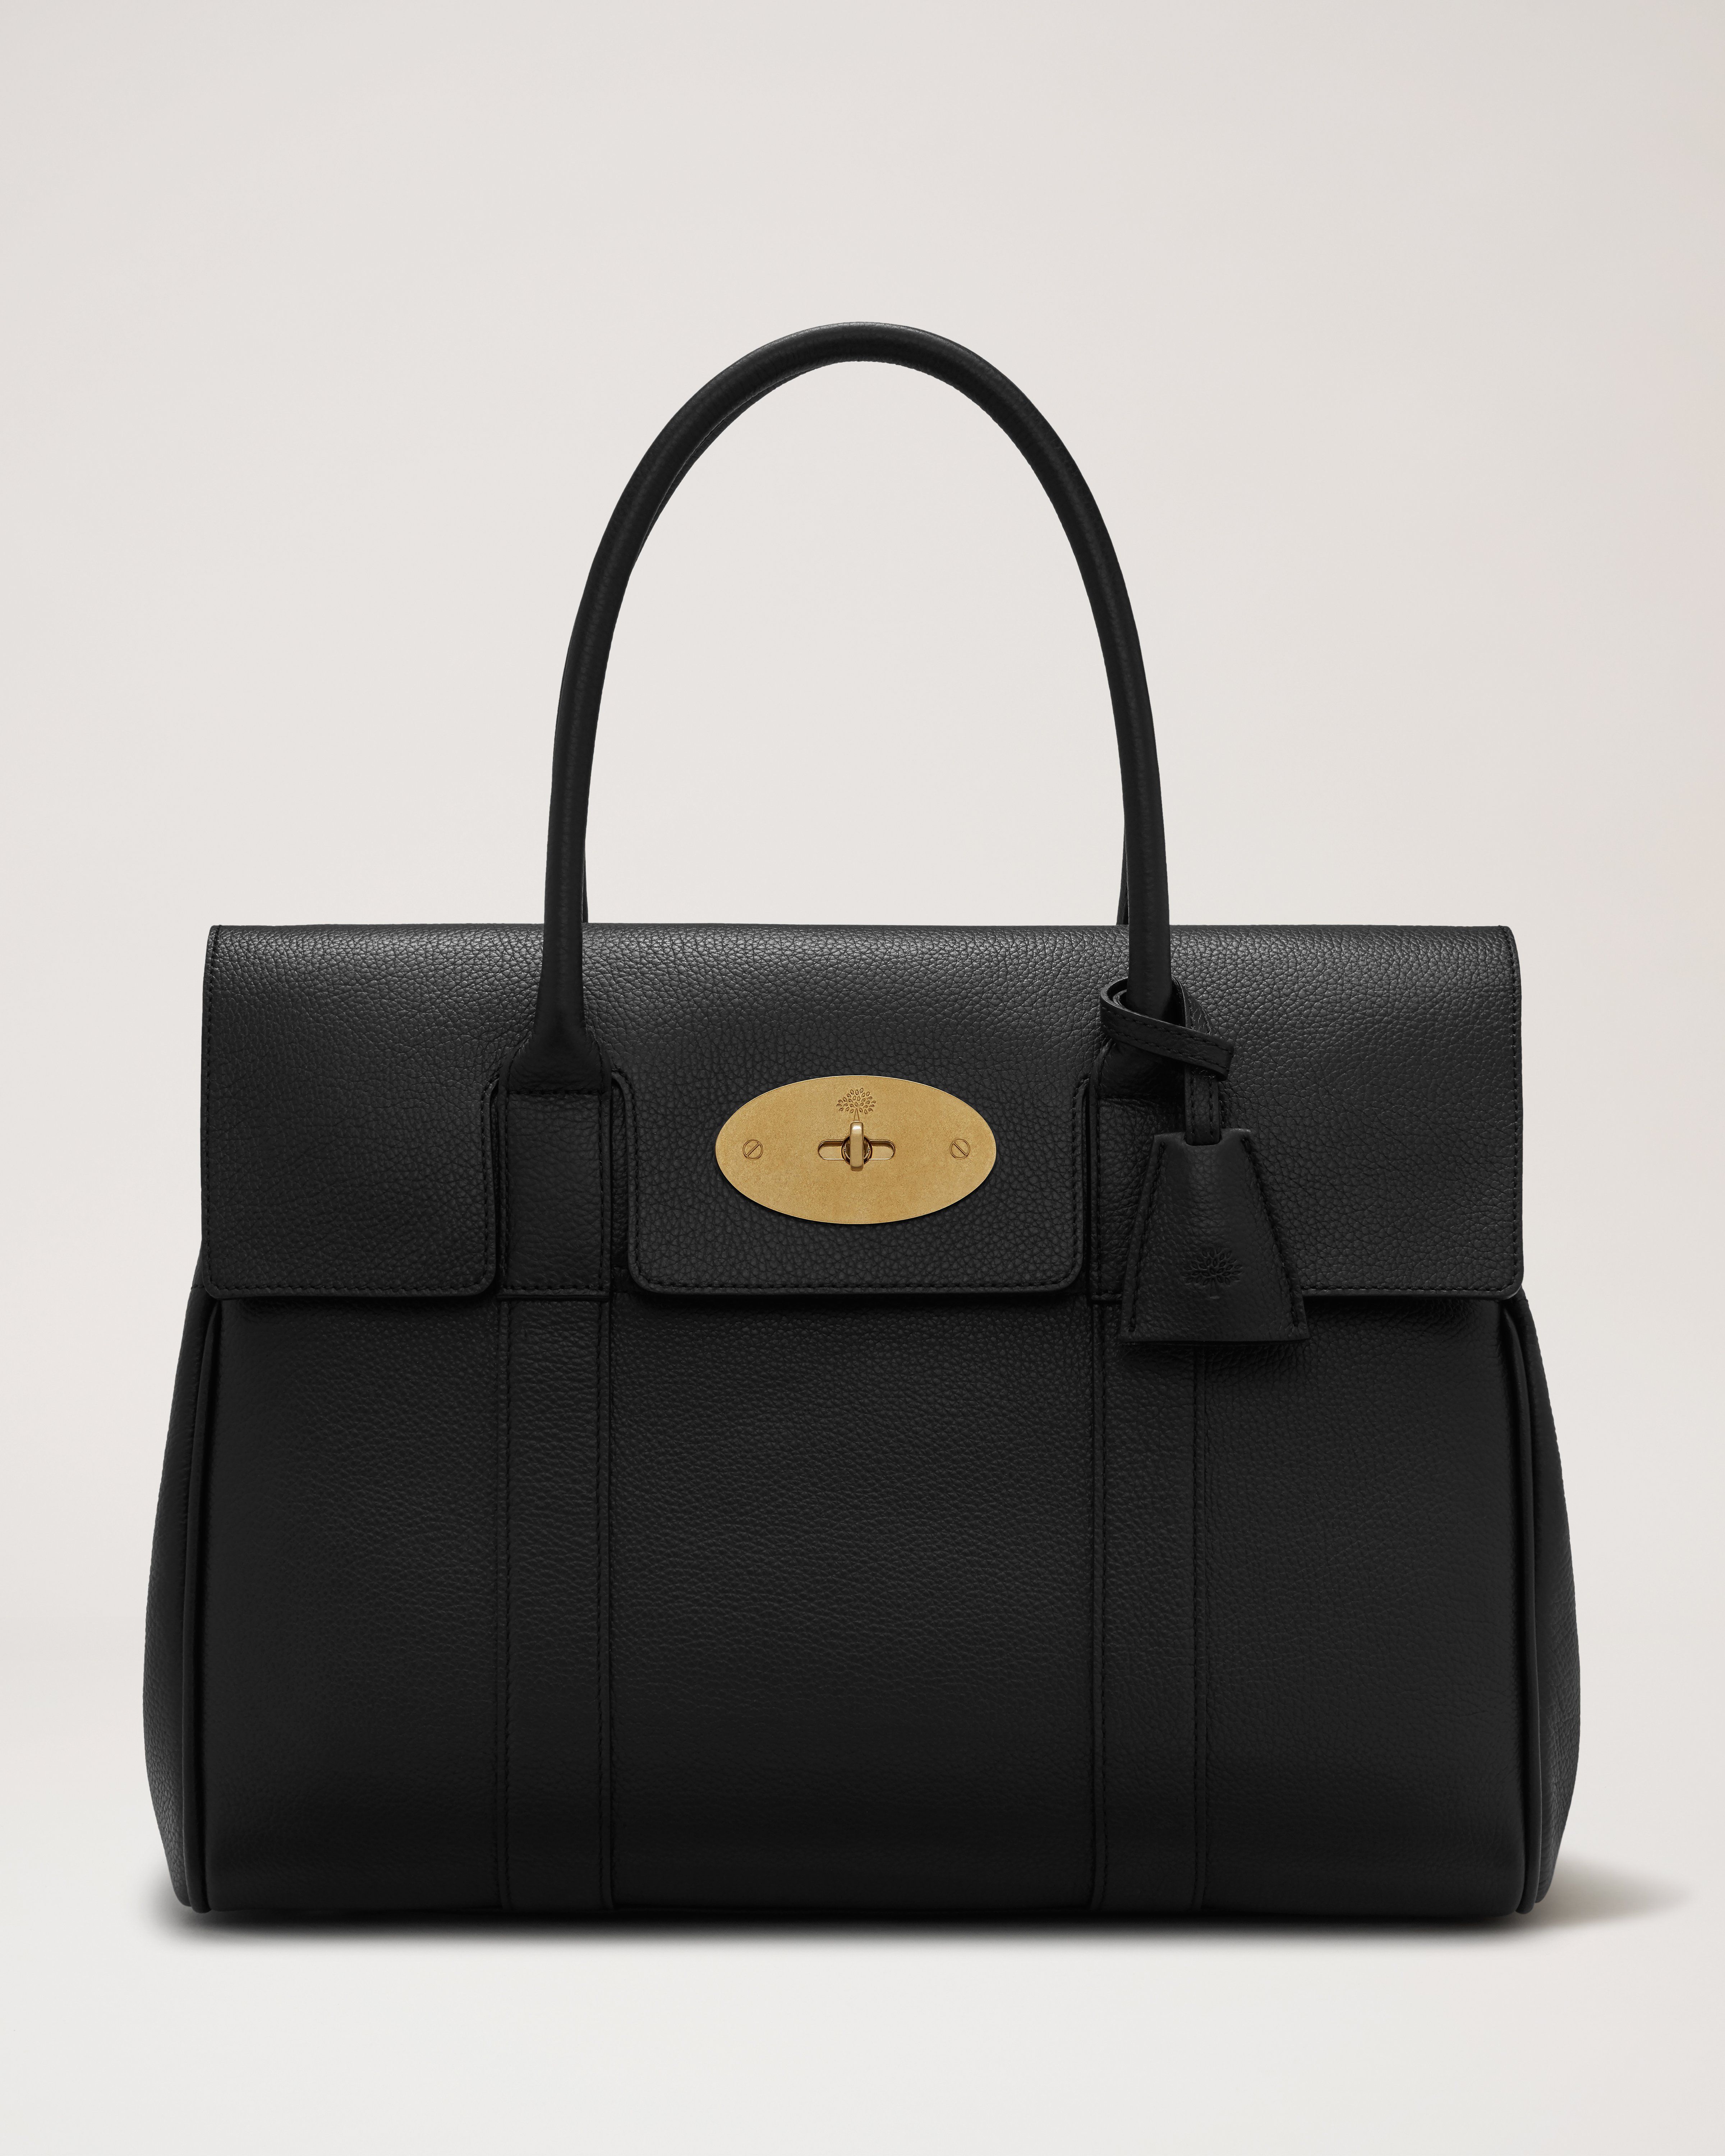 Four Designer Bags We Love from Mulberry, Gucci and More